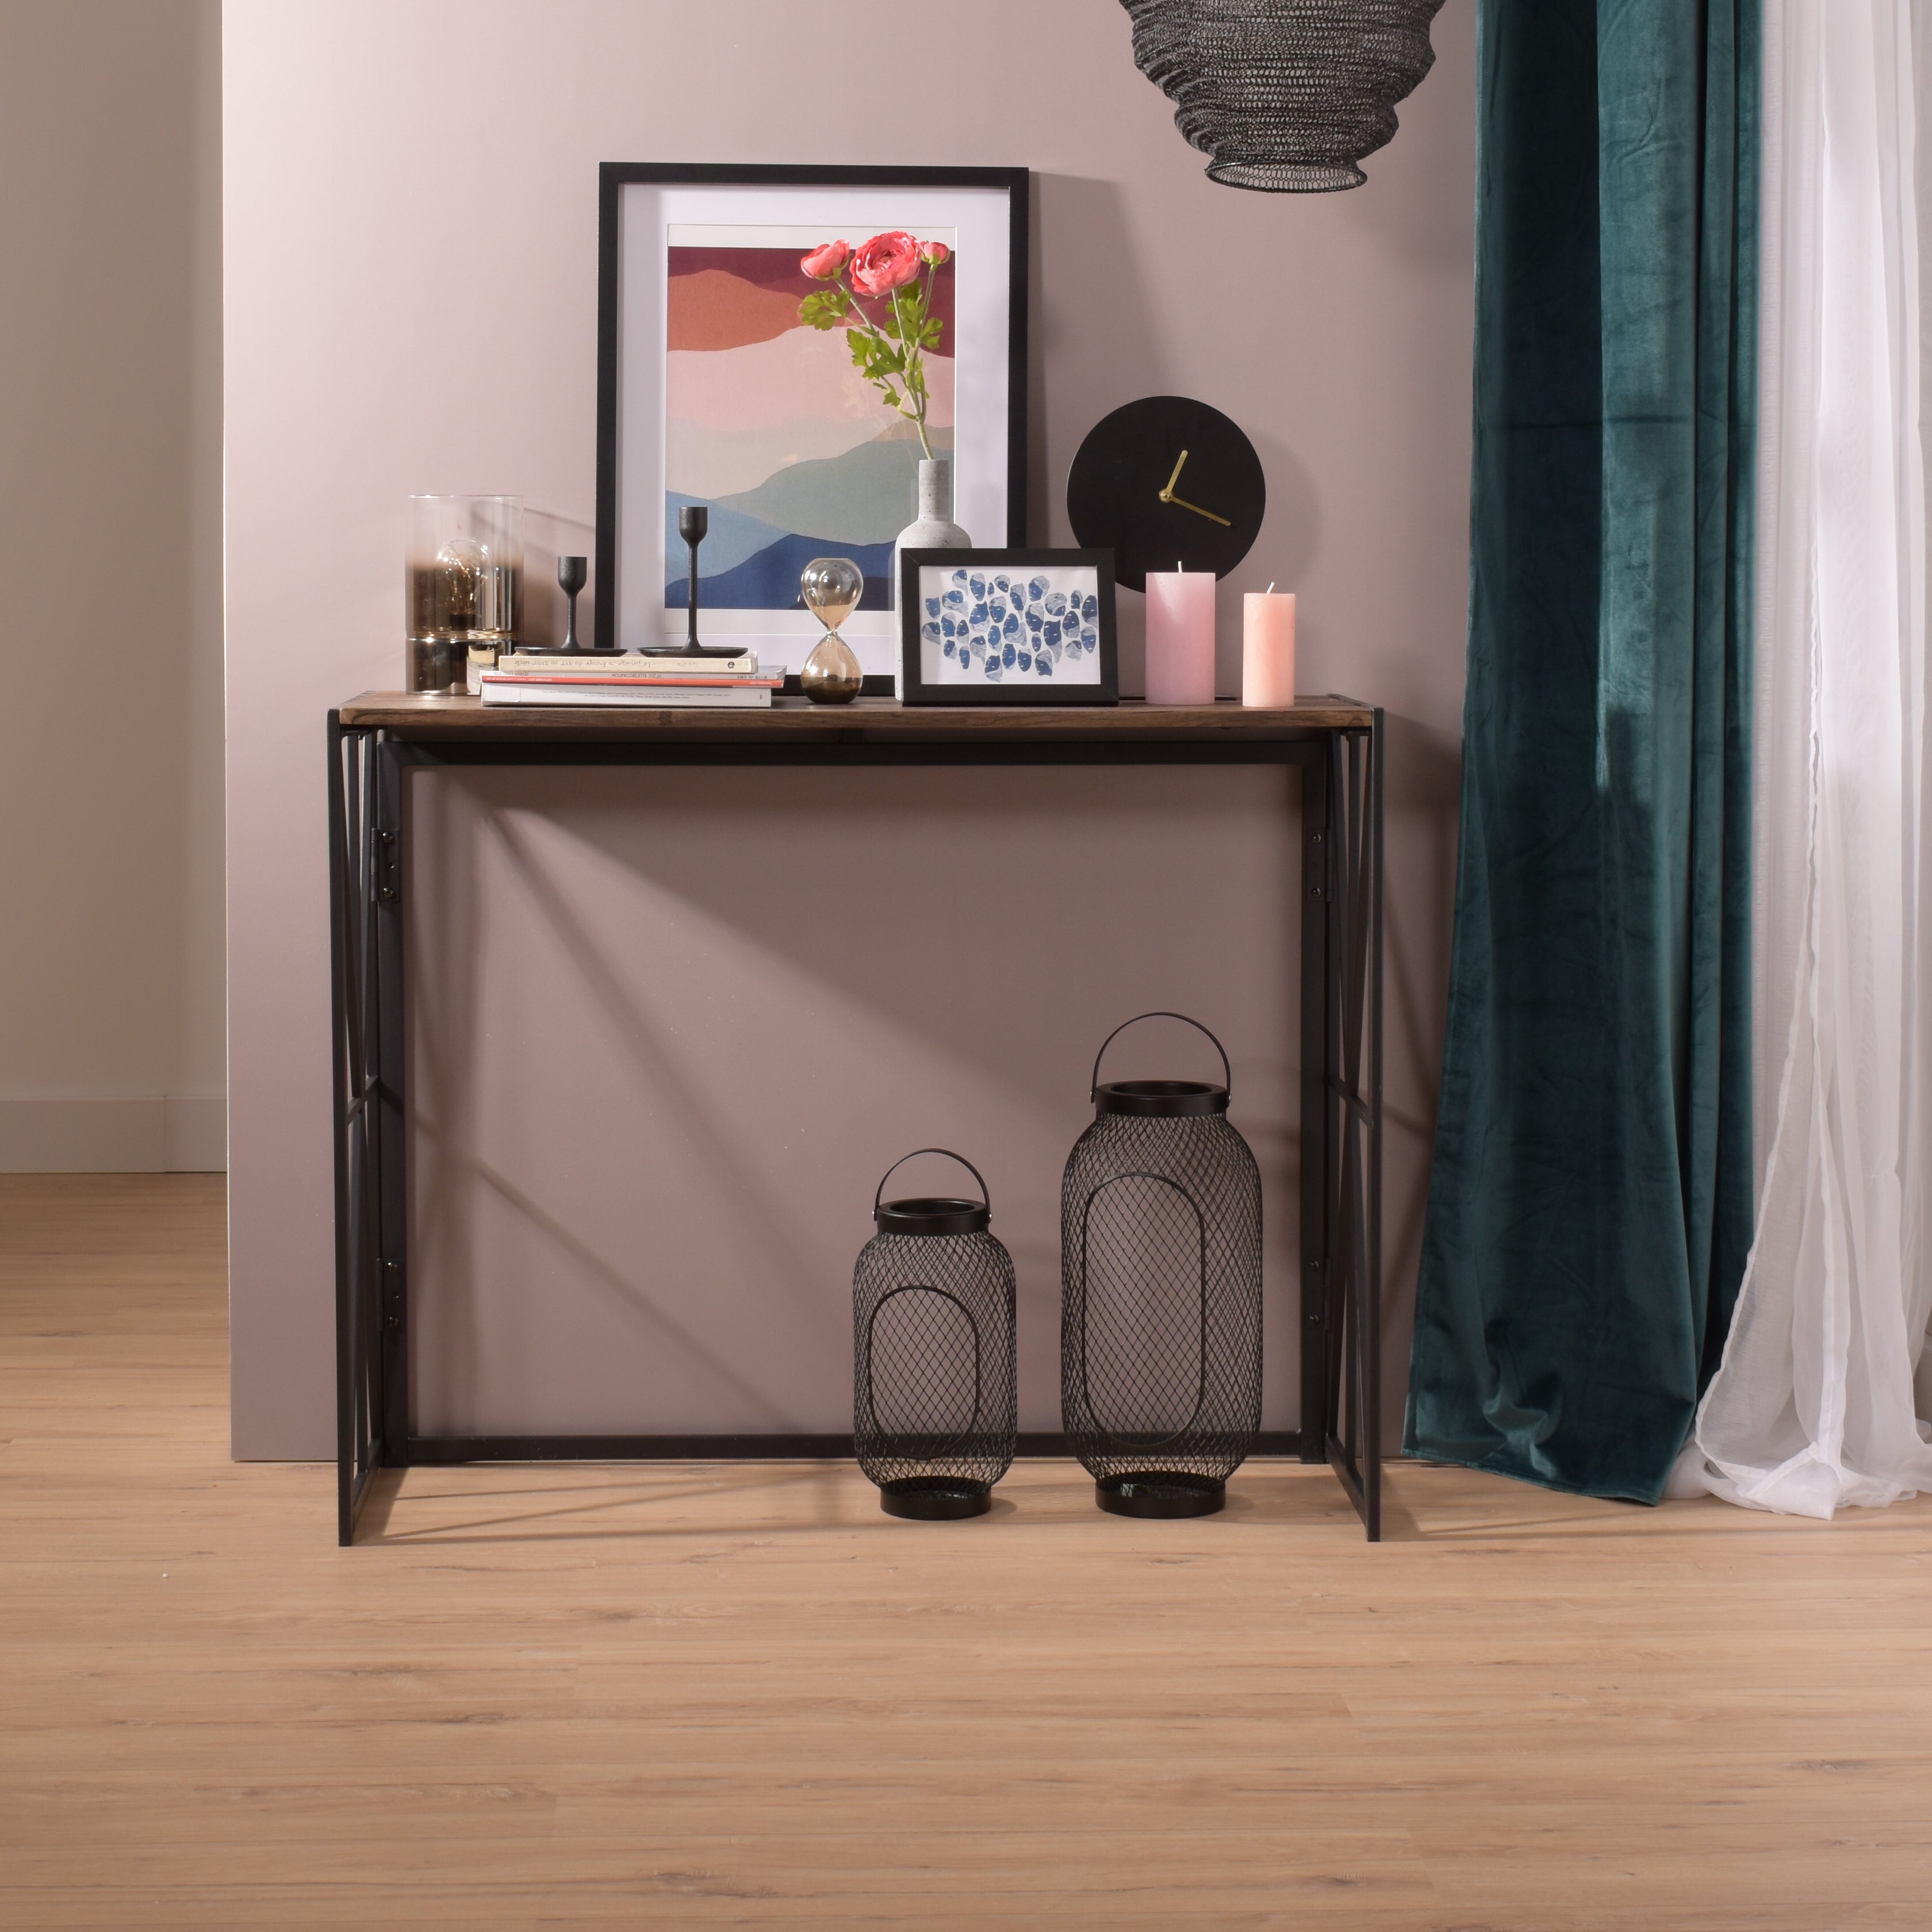 Side table for entrance, metal industrial style console and MDF top - HORES